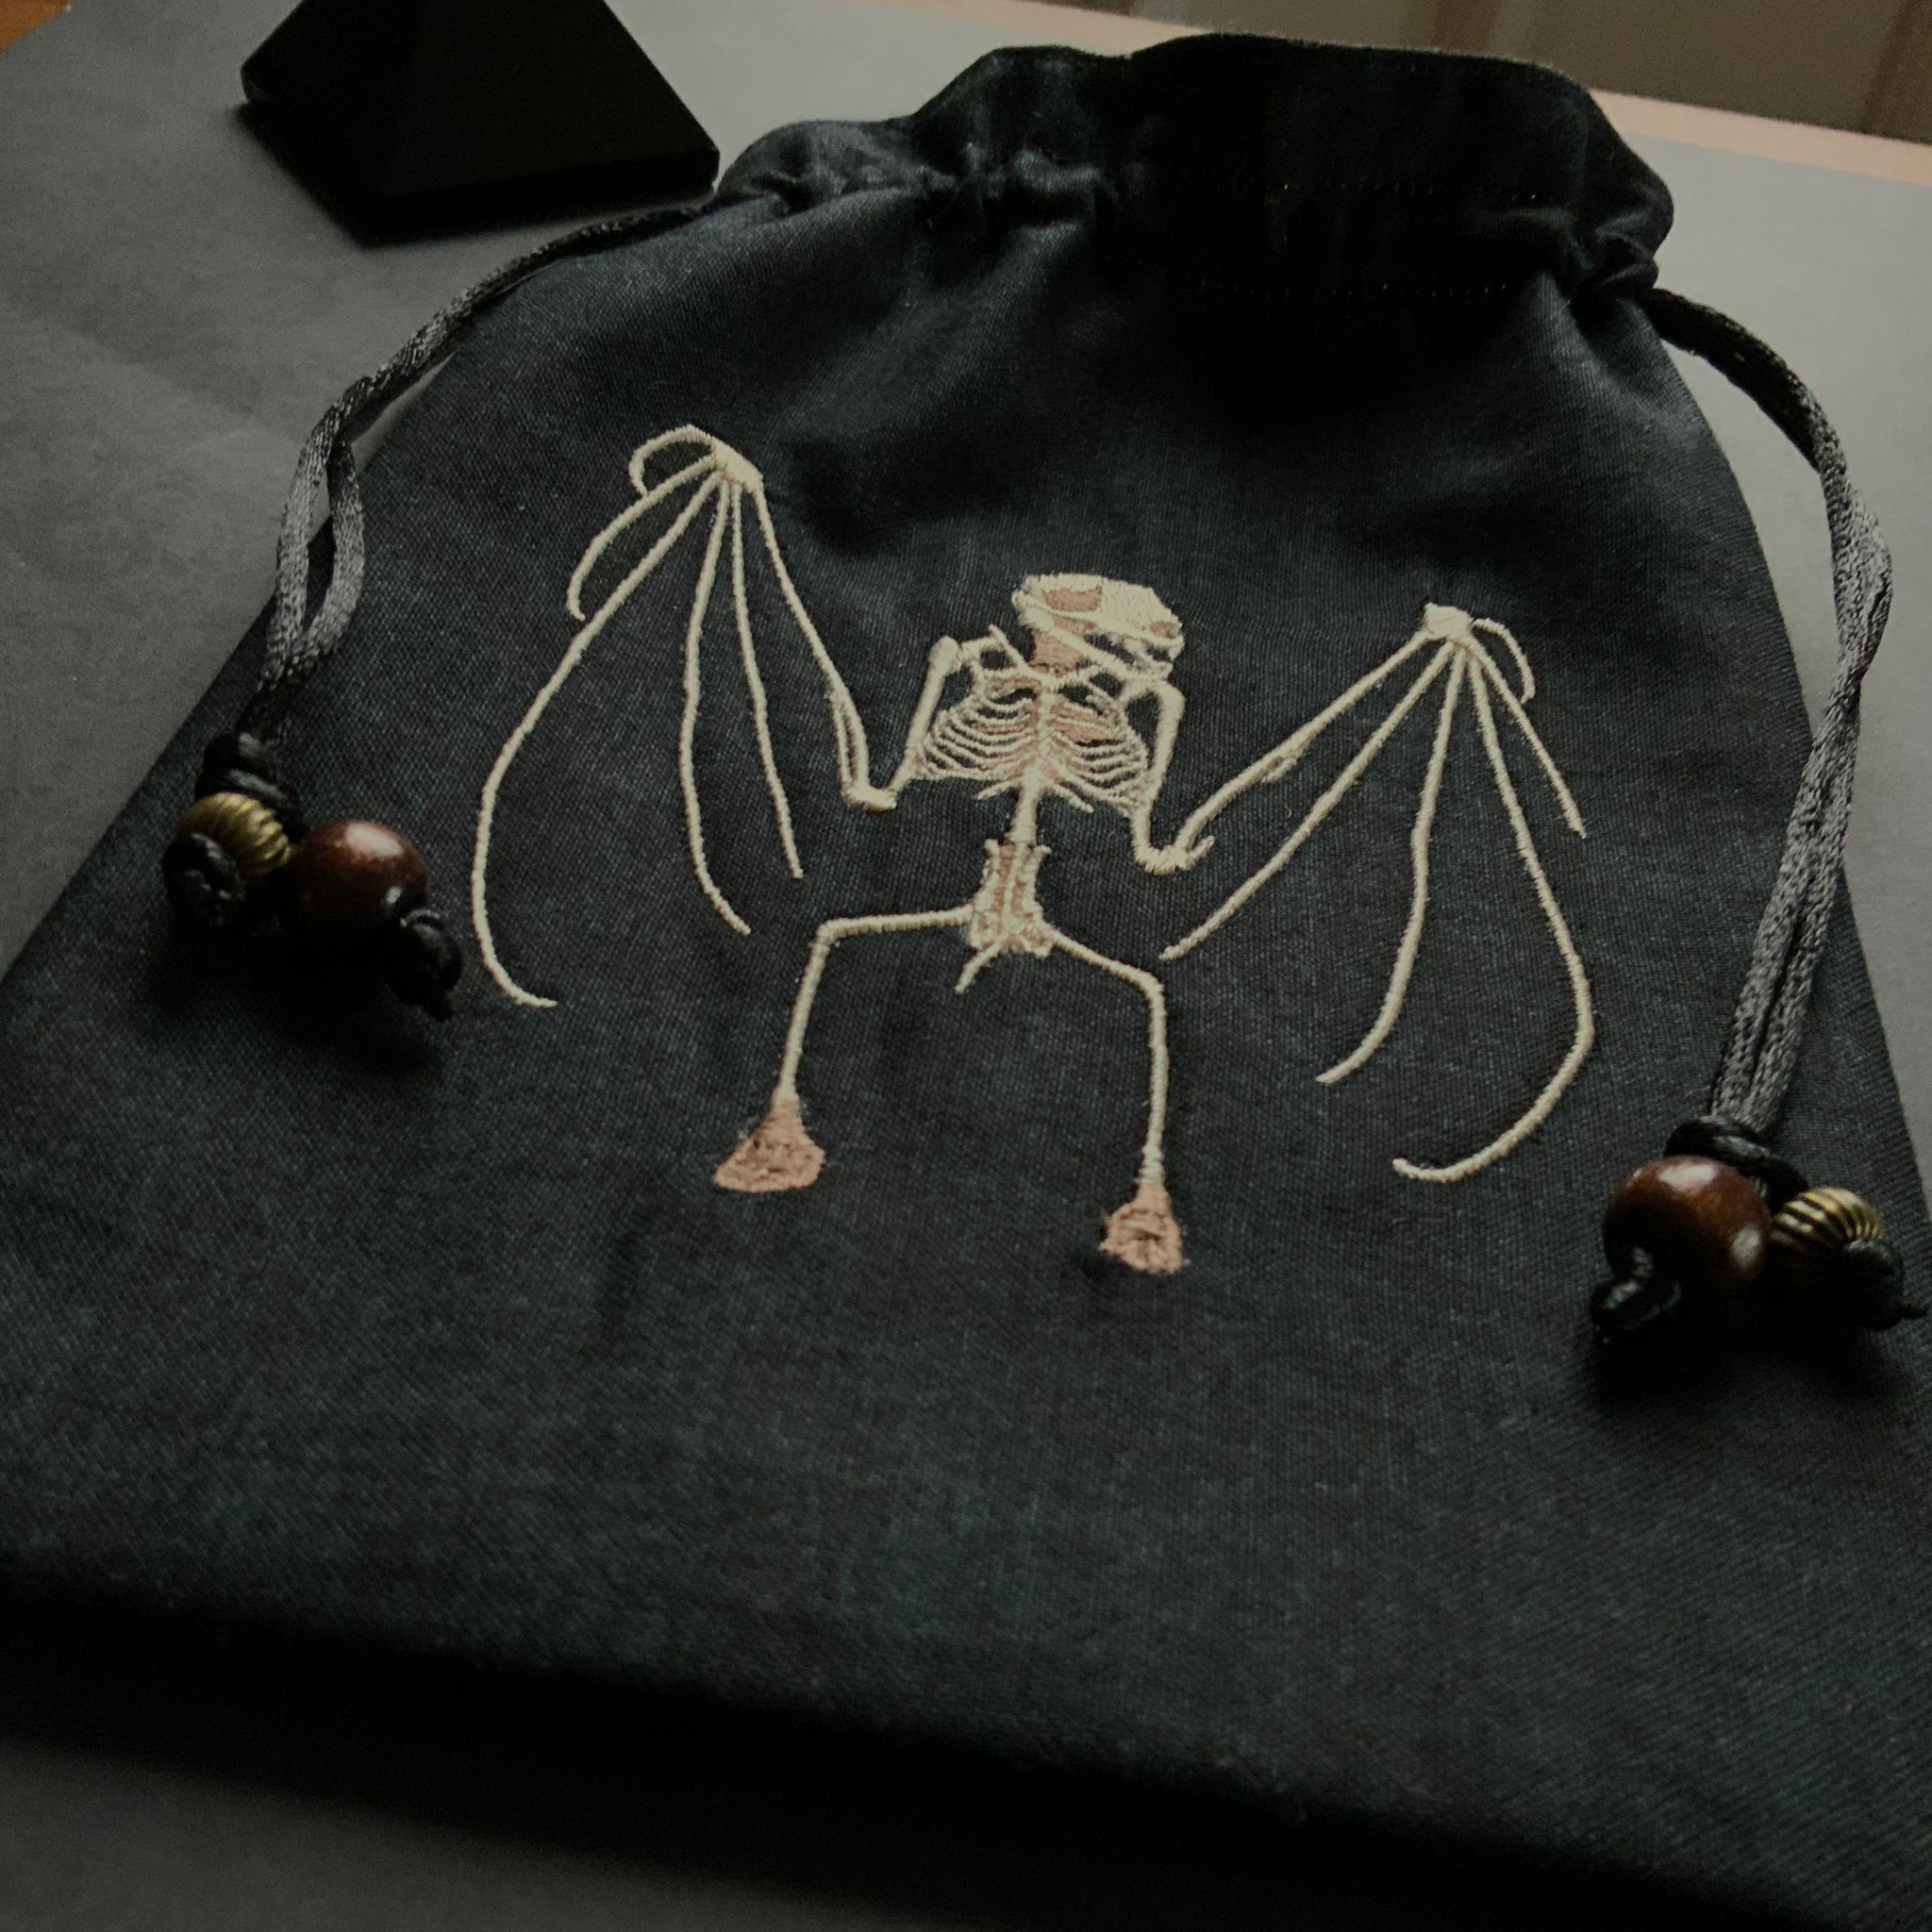 Embroidered Bat Skeleton Pouch